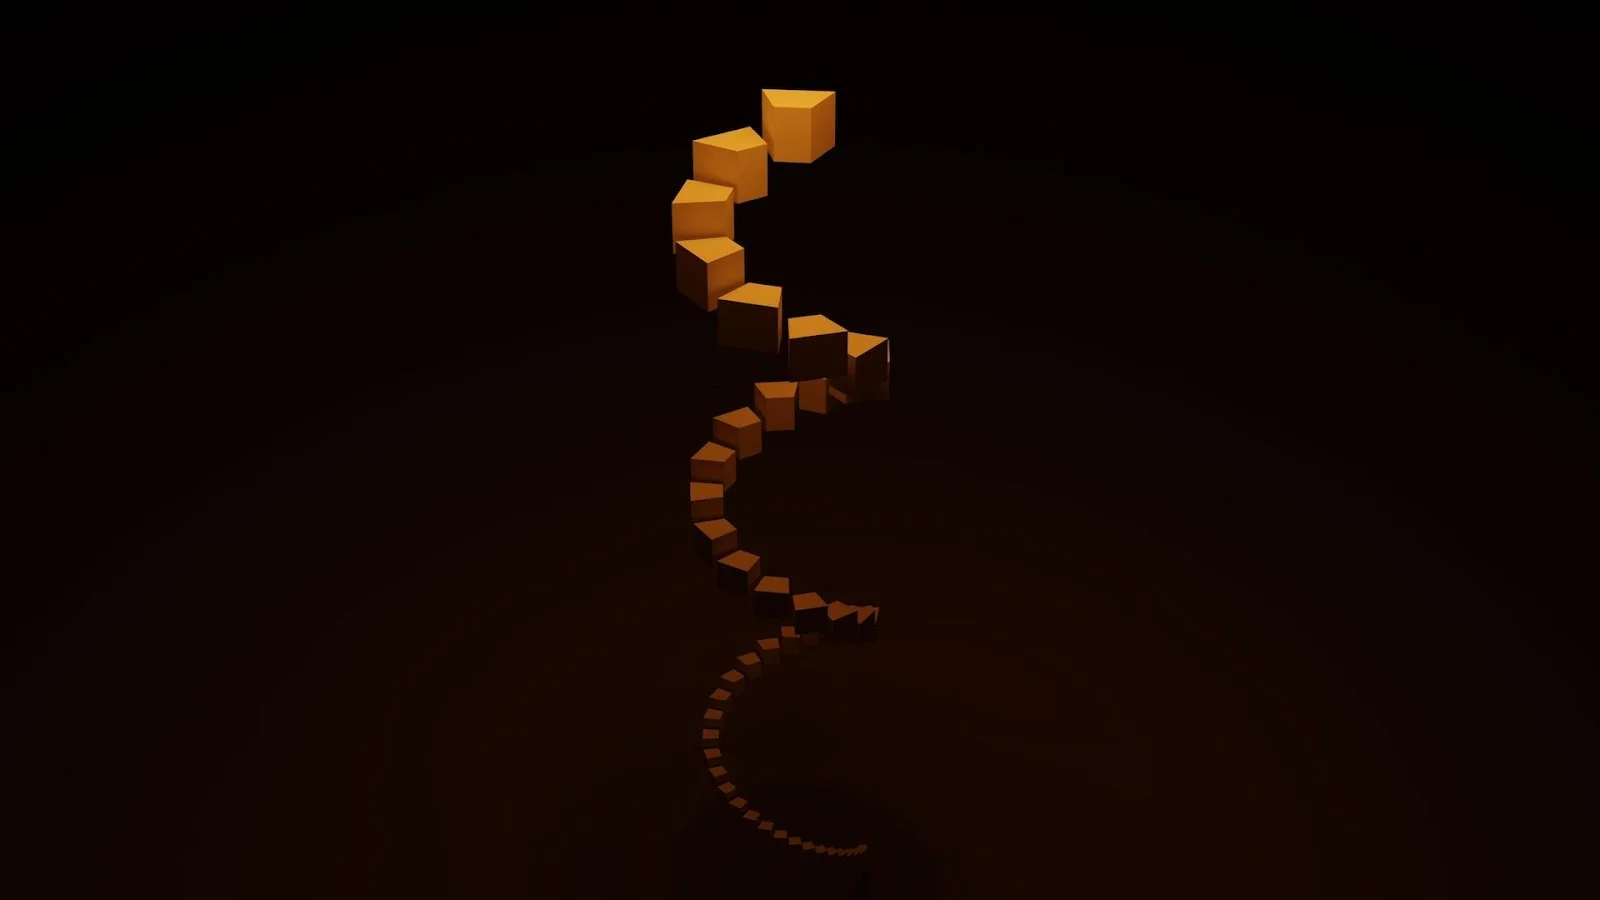 A series of blocks arranged as a spiral staircase